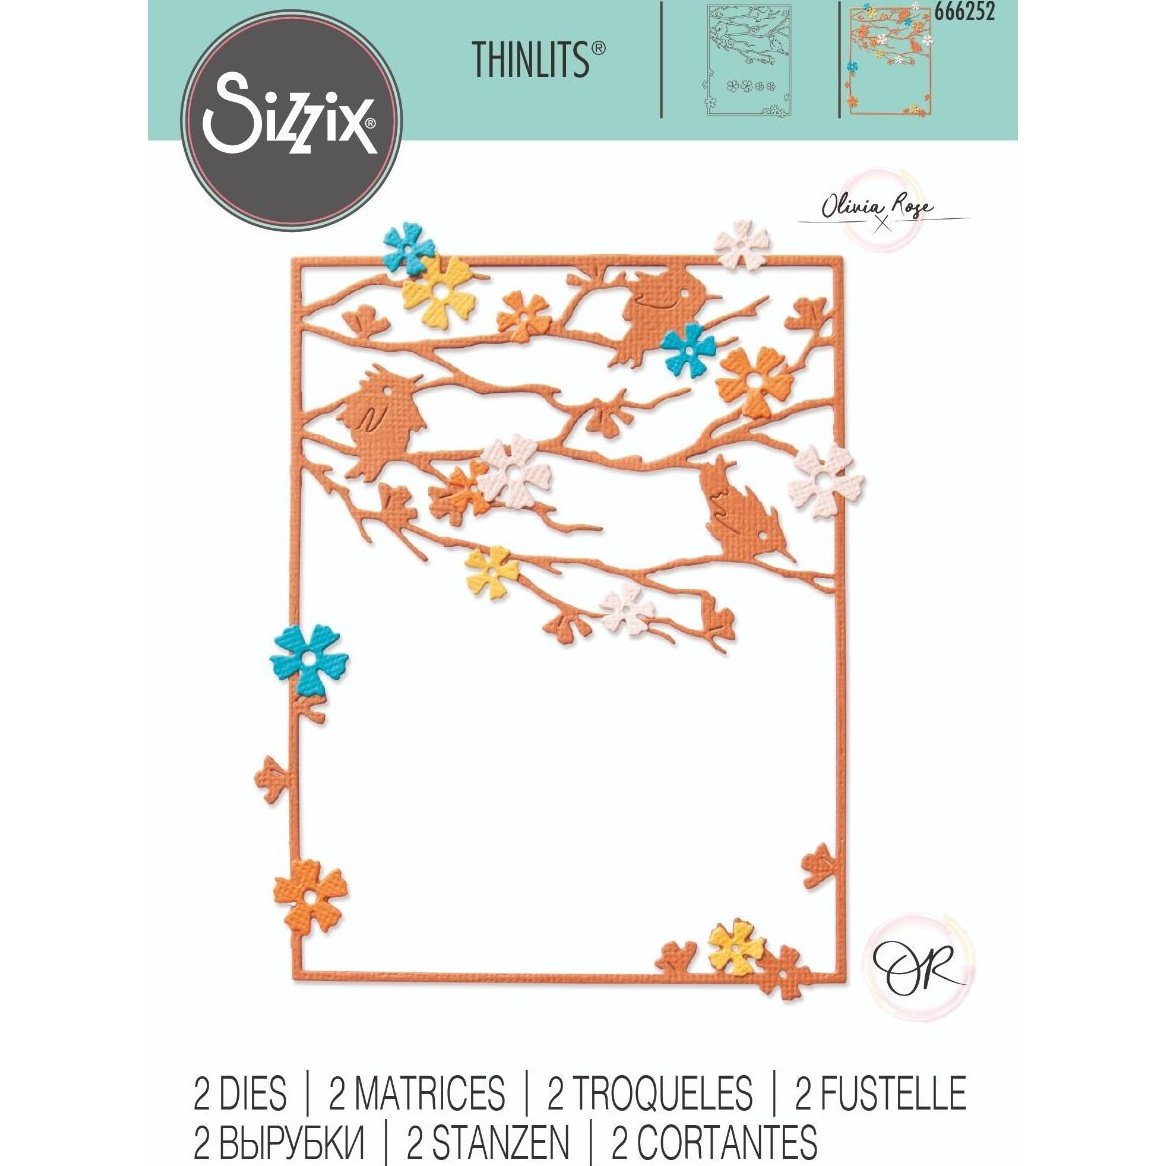 Sizzix Thinlits Die Set 2PK Woodland Cardfront by Olivia Rose